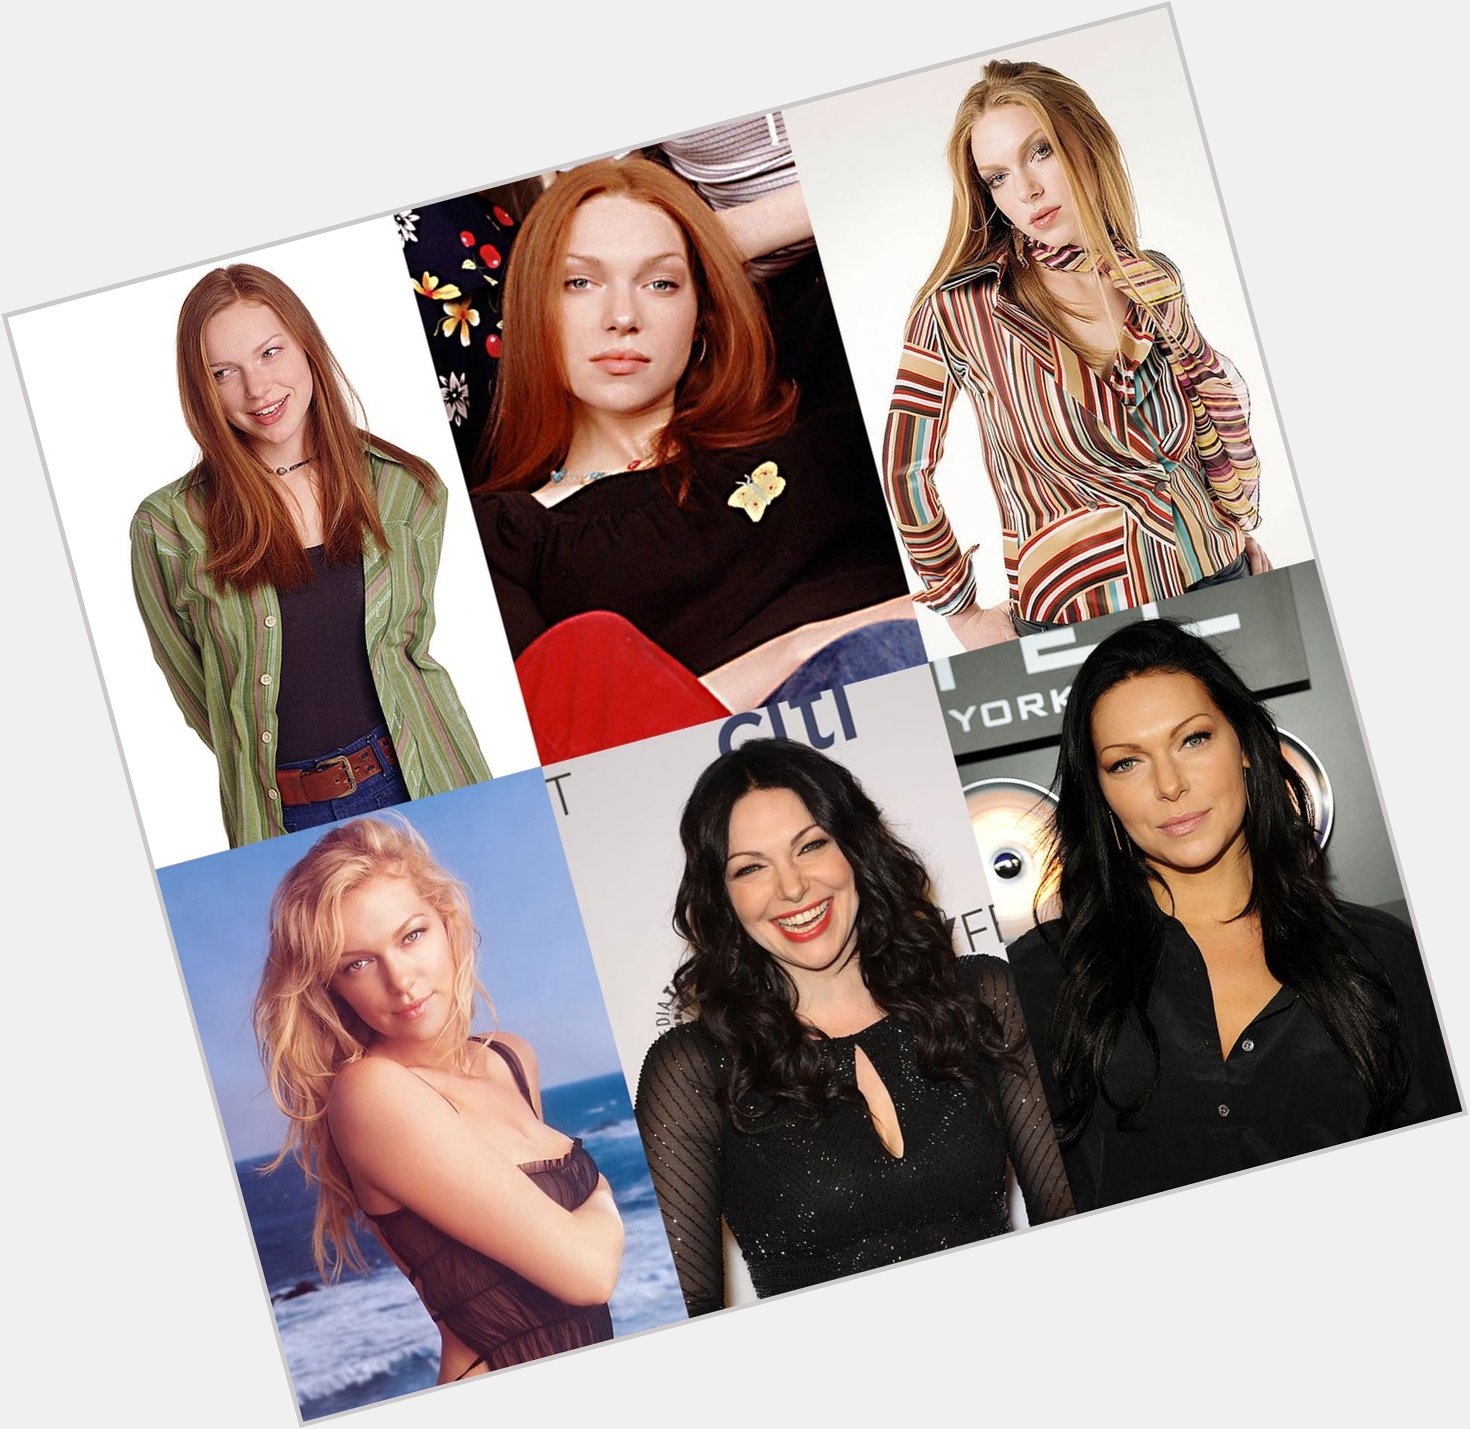 I\ve always found Laura Prepon to be an astonishingly attractive woman. Happy Birthday to her. 